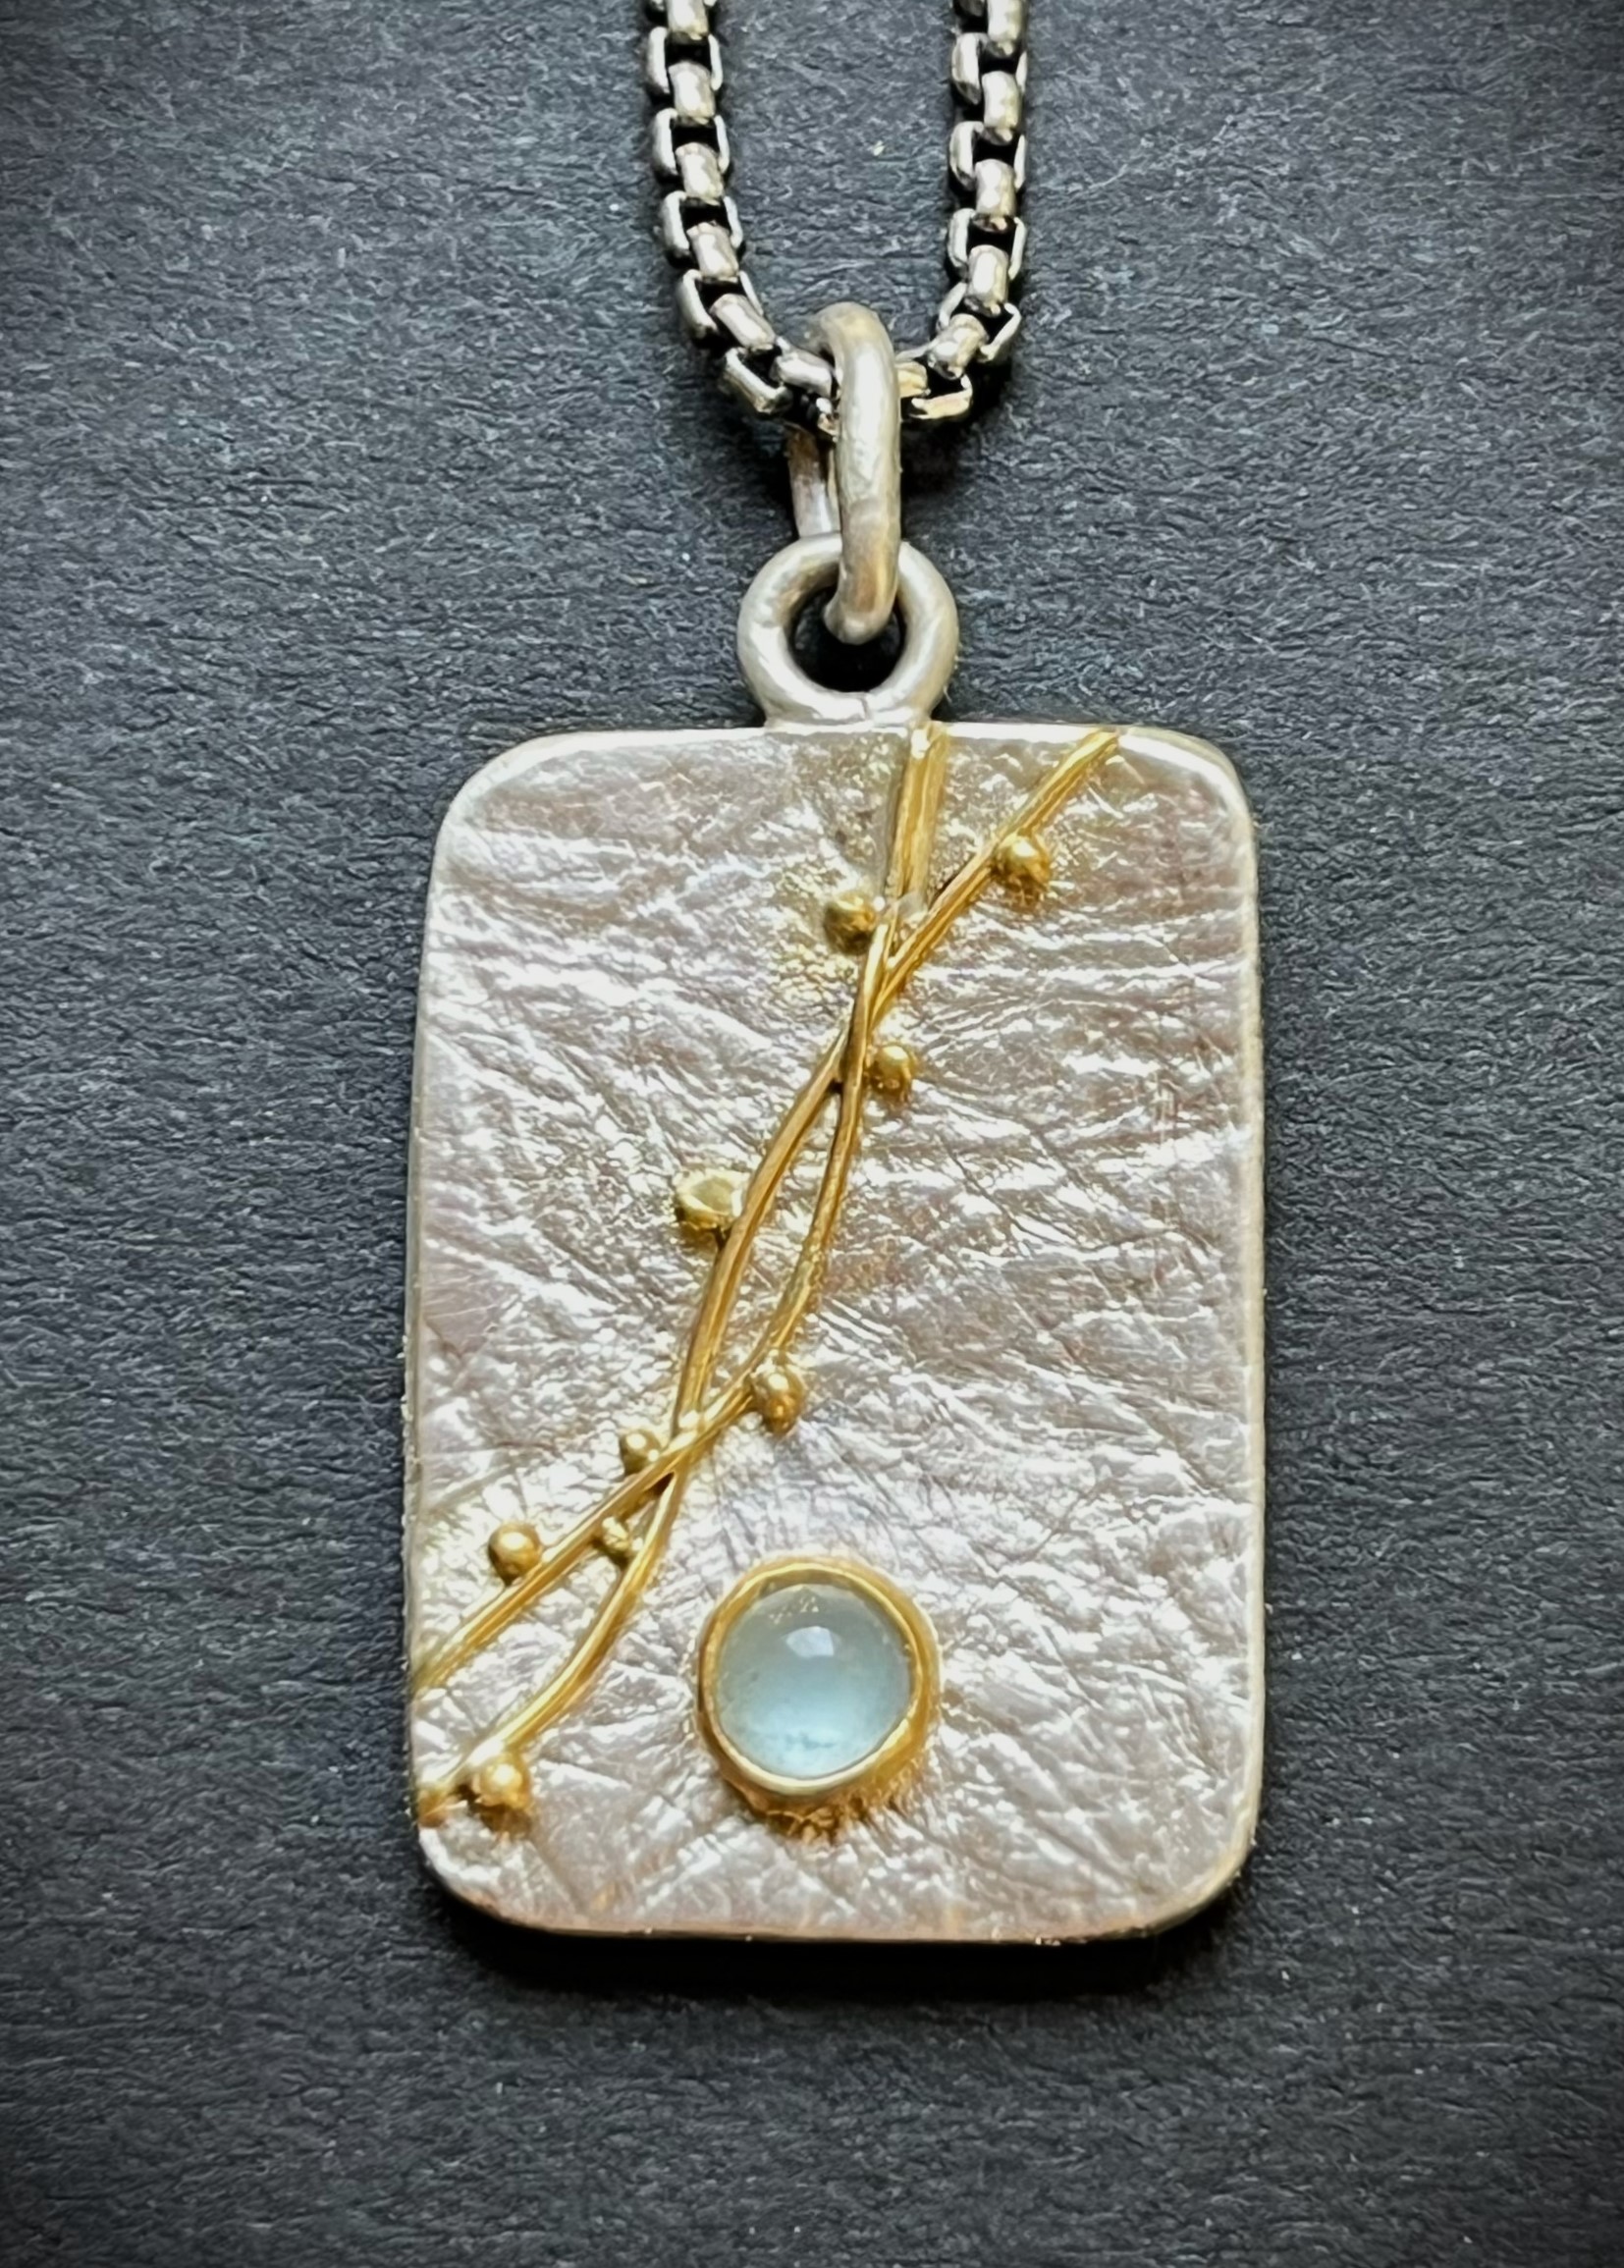 Botany Necklace 30x16 mm Sterling Silver, 22k gold Aquamarine 4mm diameter 18” rounded box chain Sterling Silver